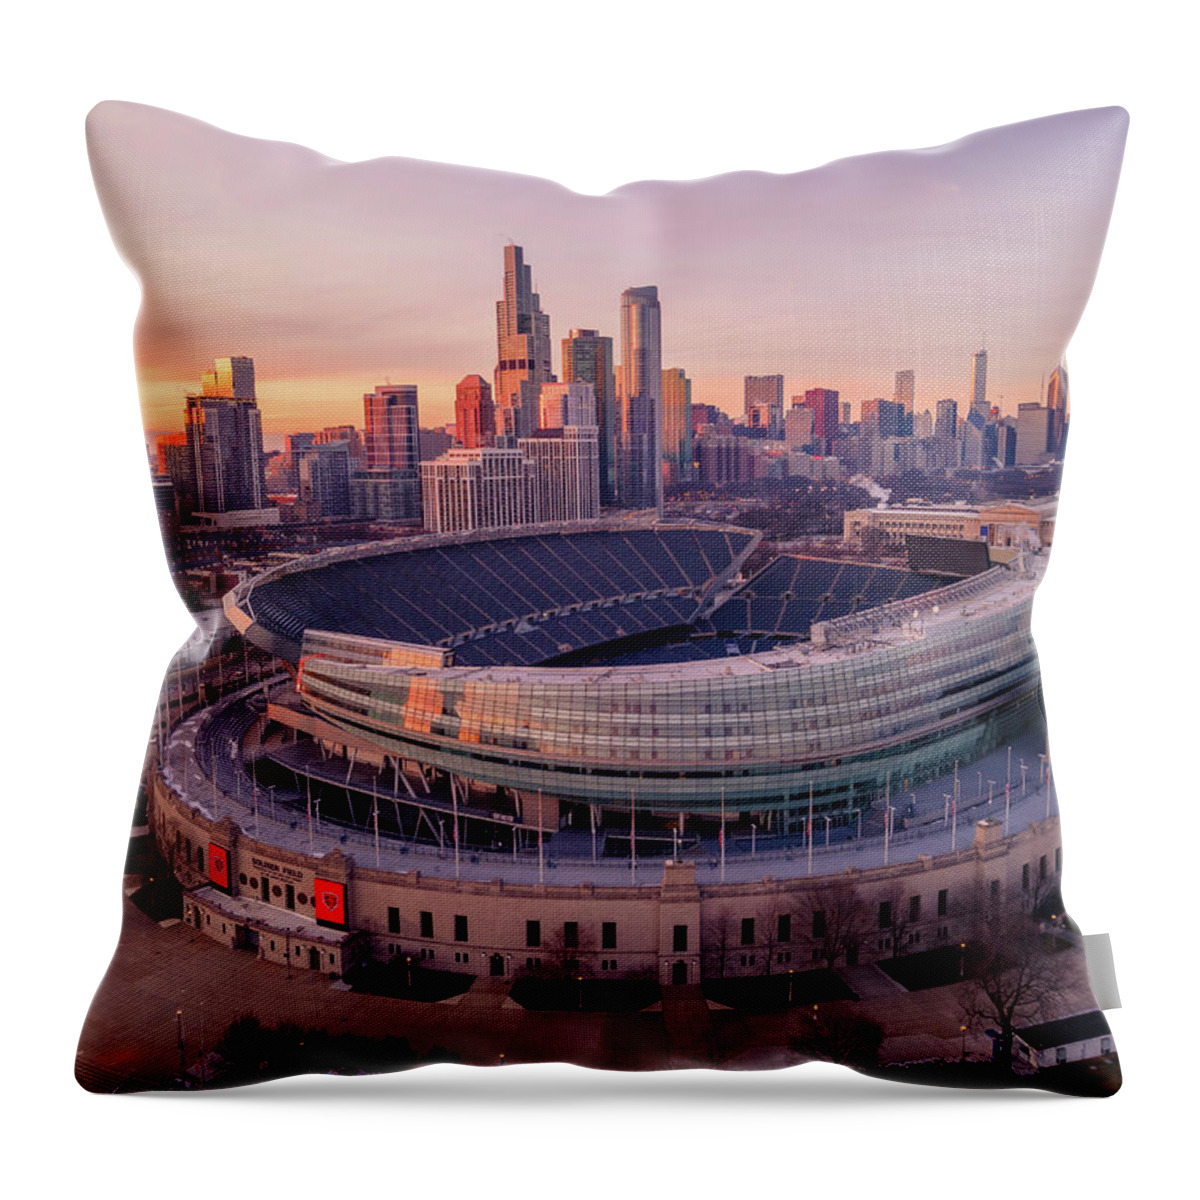 Chicago Throw Pillow featuring the photograph Soldier Field Sunset by Bobby K